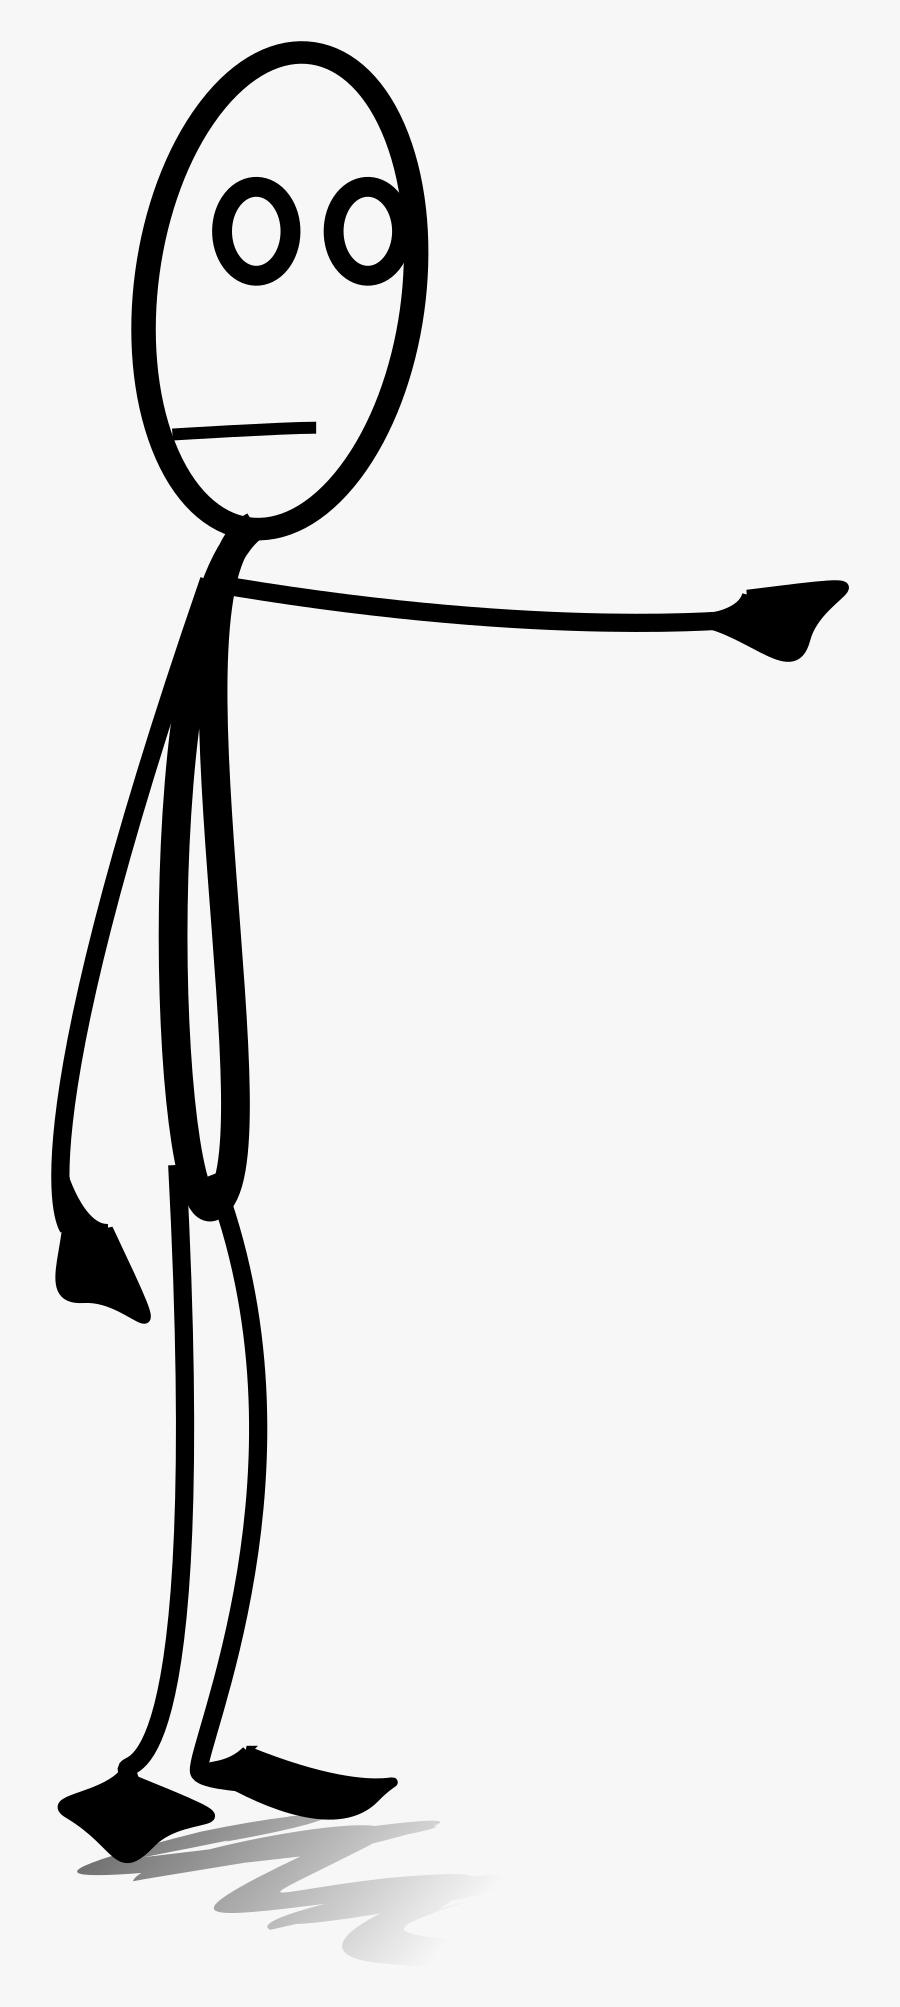 Pointing Clipart Standing - Cartoon Stick Man Png, Transparent Clipart